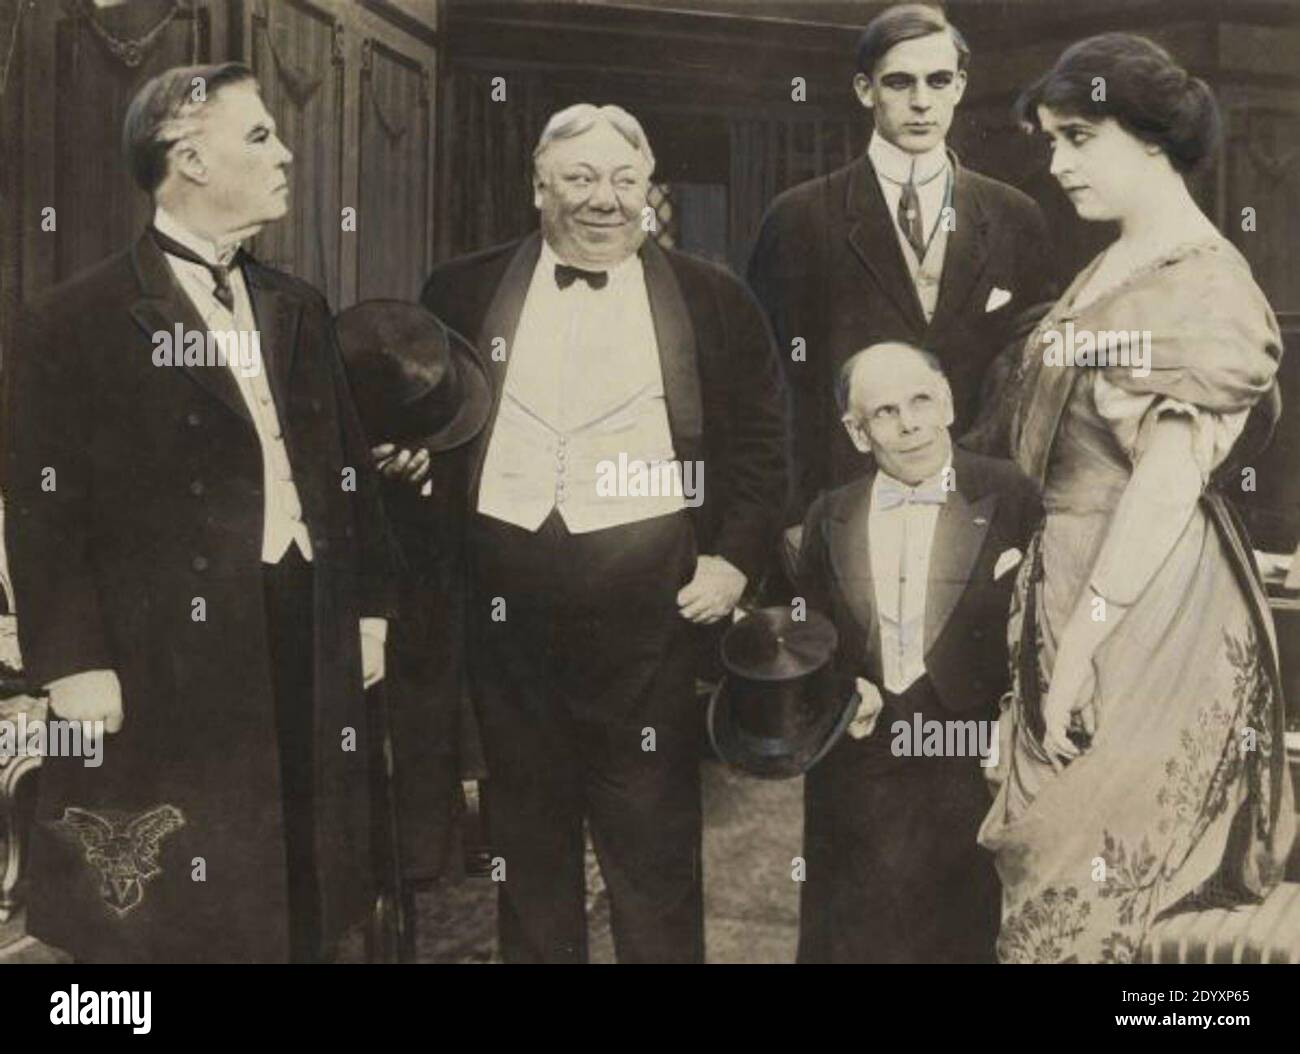 Scene still from the 1912 Vitagraph production Chumps. Left to right: William Shea, John Bunny, Wallace Reid, Marshall P. Wilder, and Leah Baird. Stock Photo